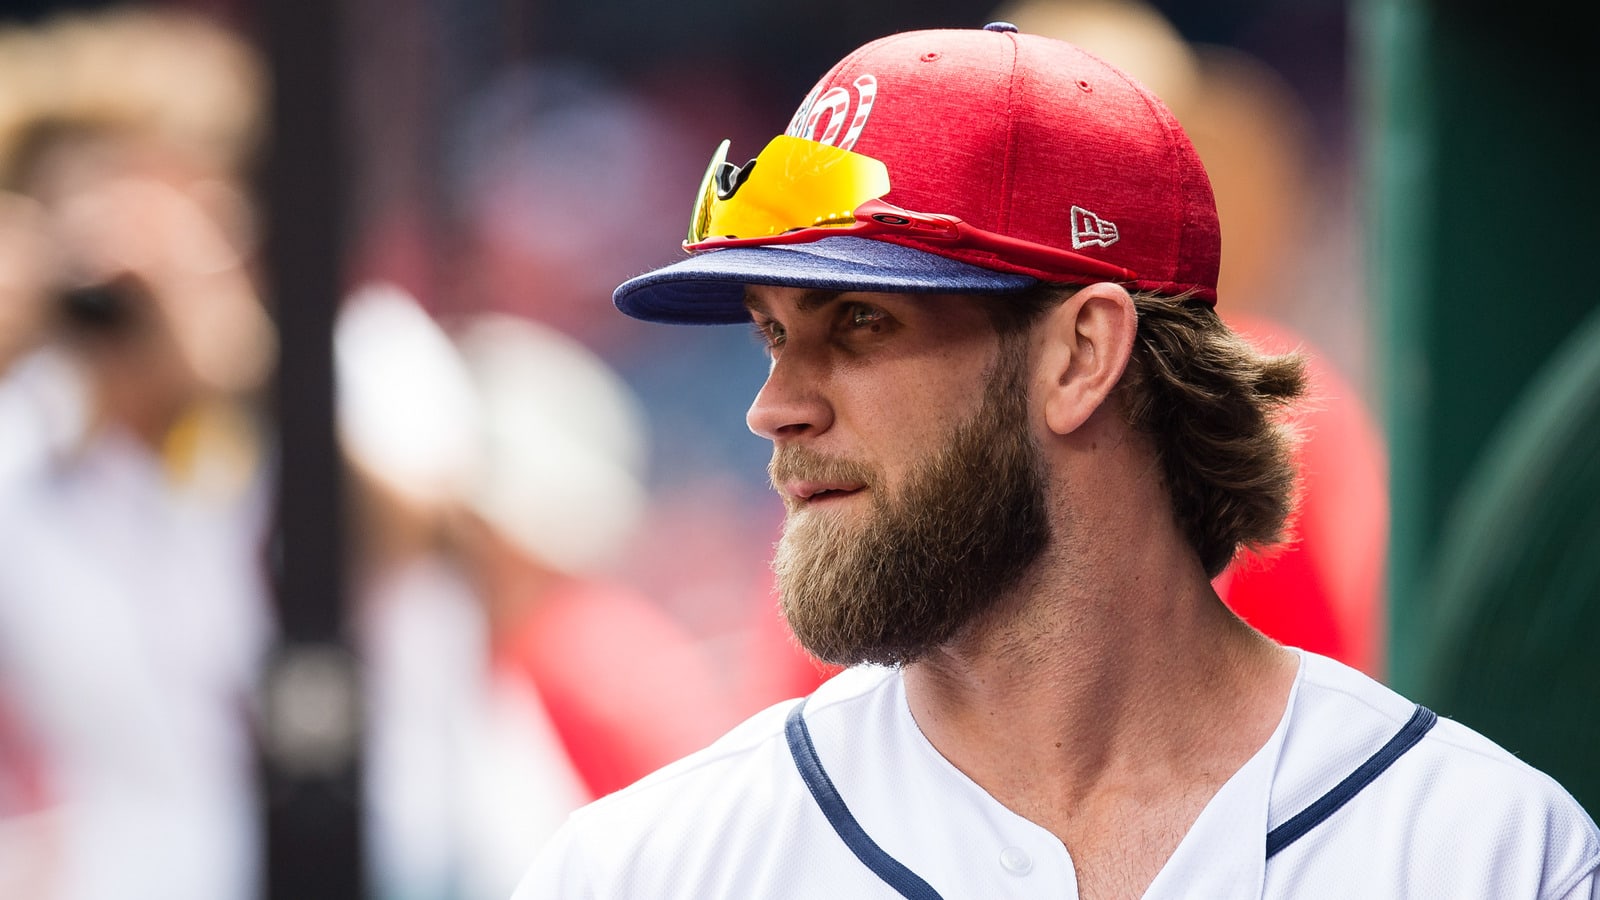 Bryce Harper refers to New York as ‘pretty crazy and hectic’